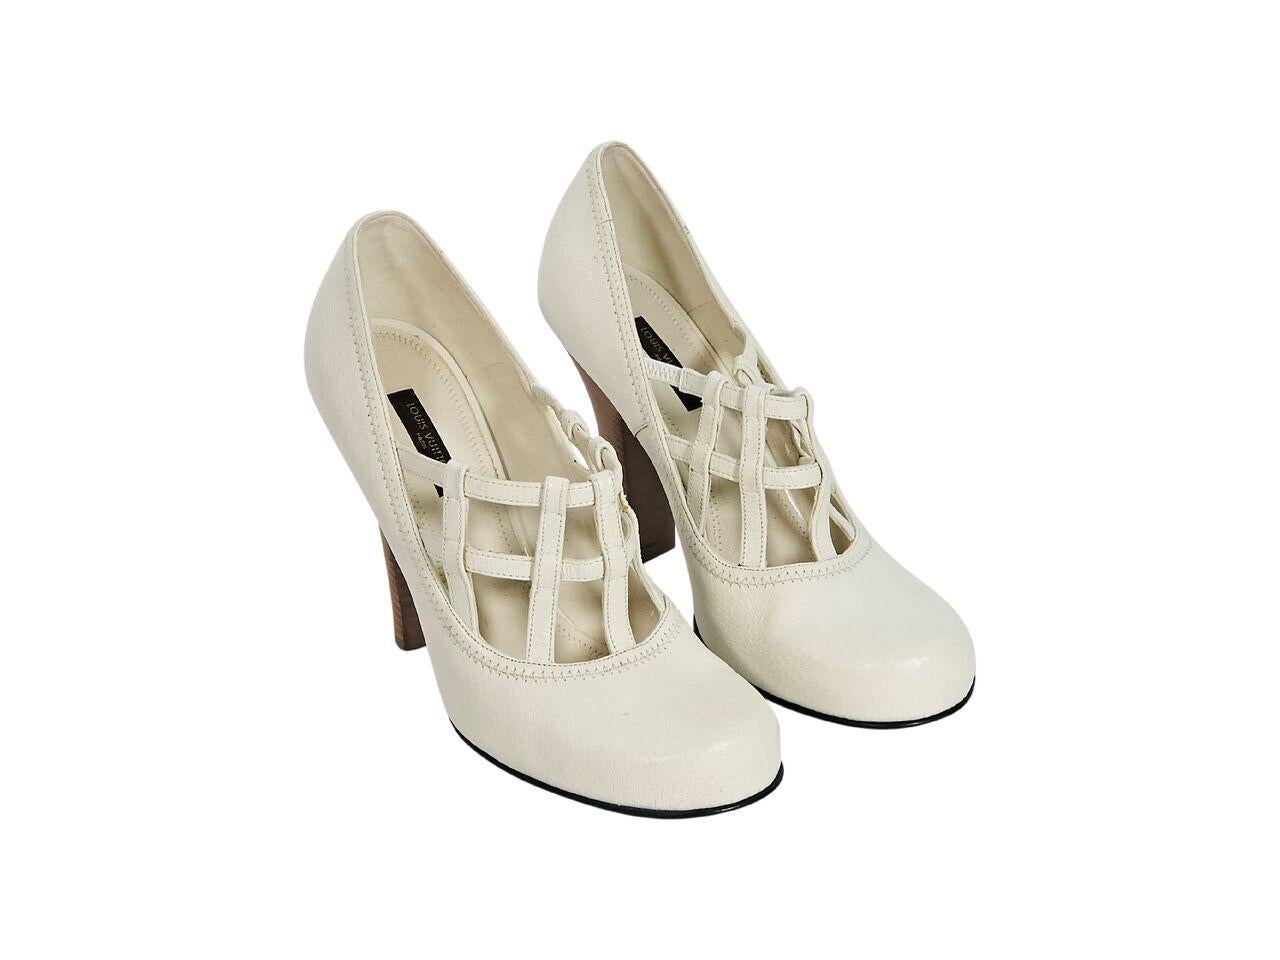 Product details:  White leather pumps by Louis Vuitton.  Stretch inset strappy cage design.  Round toe.  Chunky stacked heel.  4